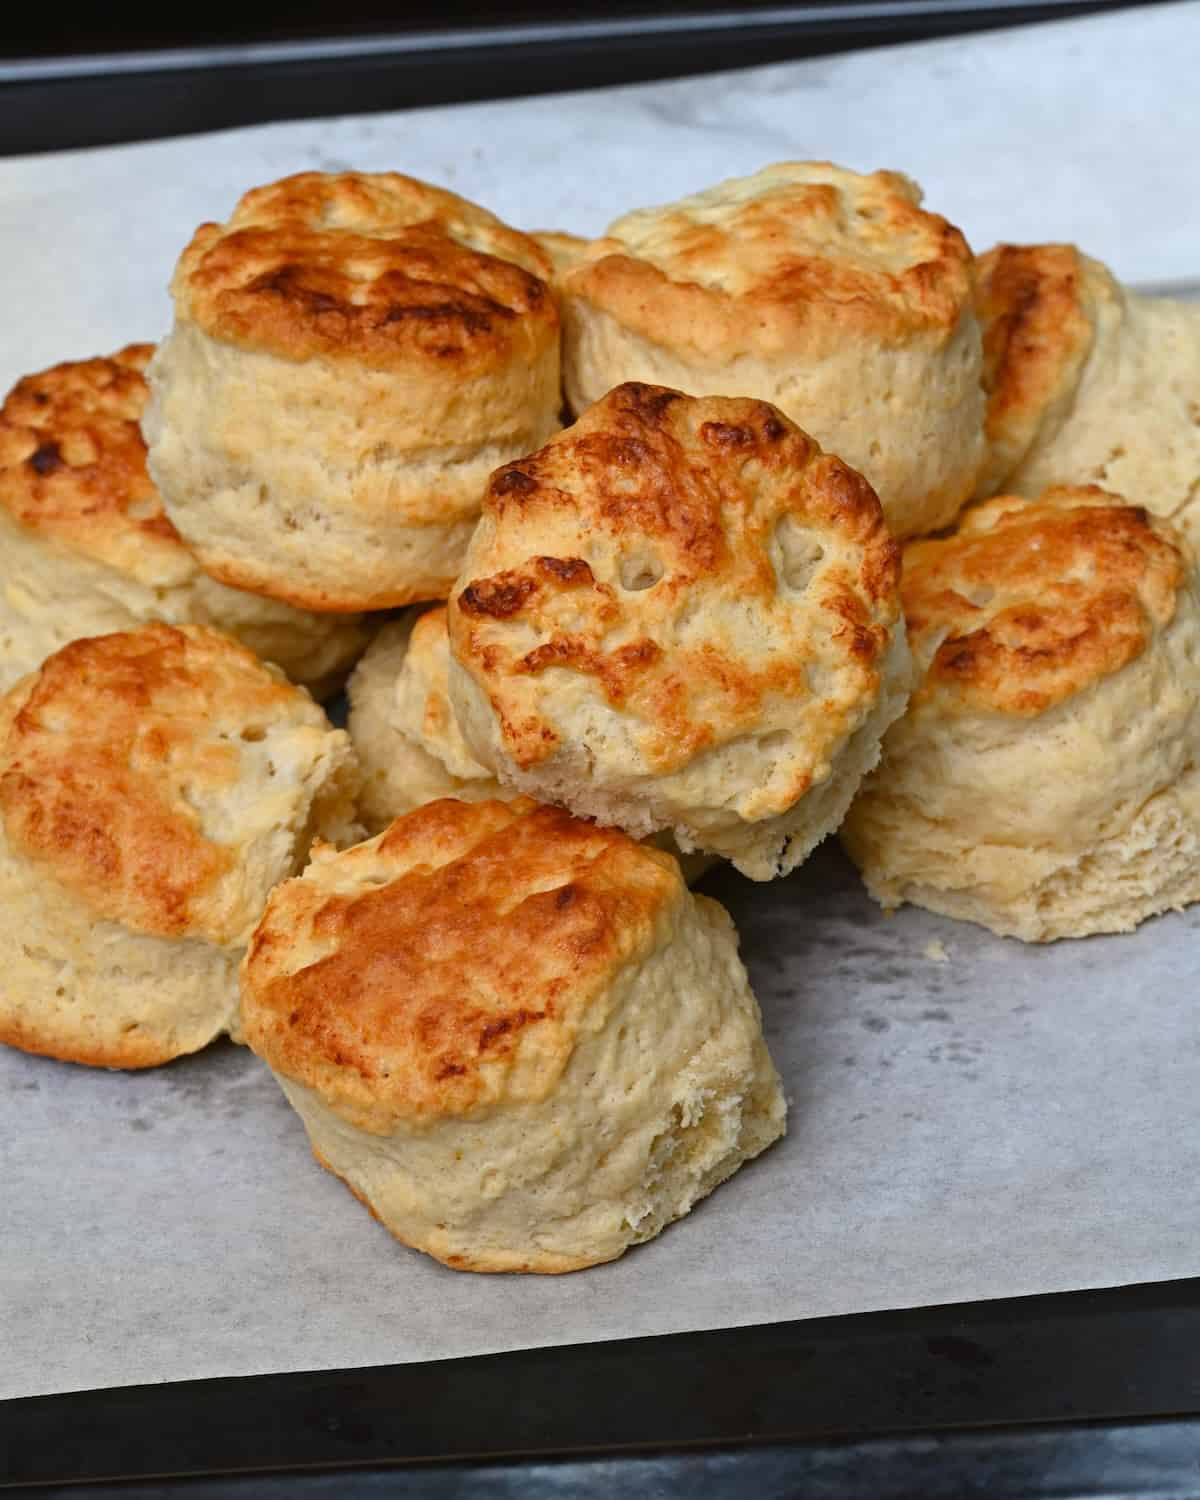 Freshly baked homemade biscuits